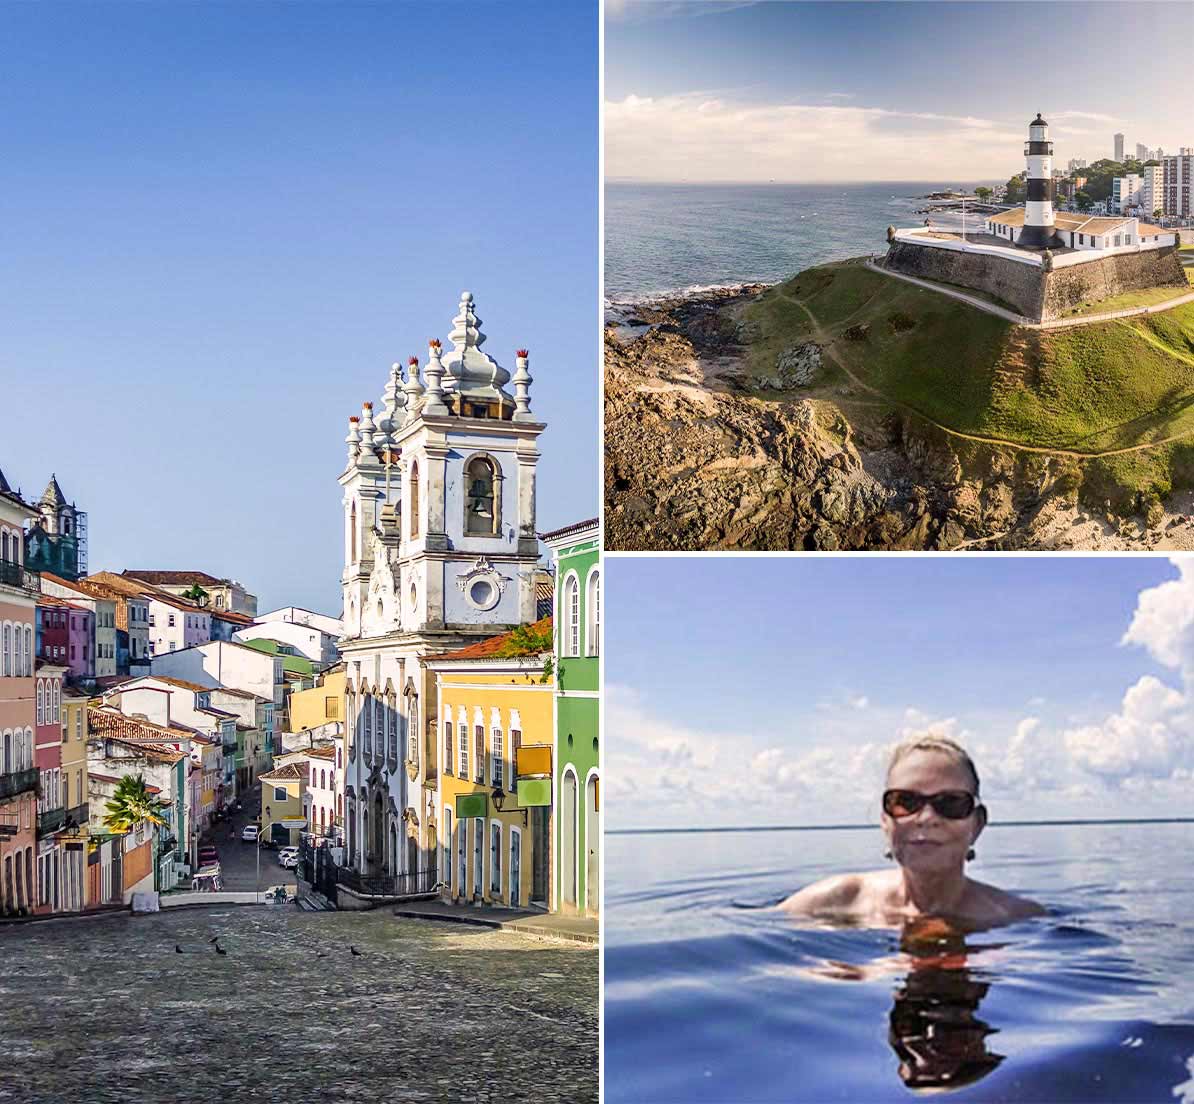 A collage of classic buildings, an old fortress, and a woman swimming in Salvador Bahia.